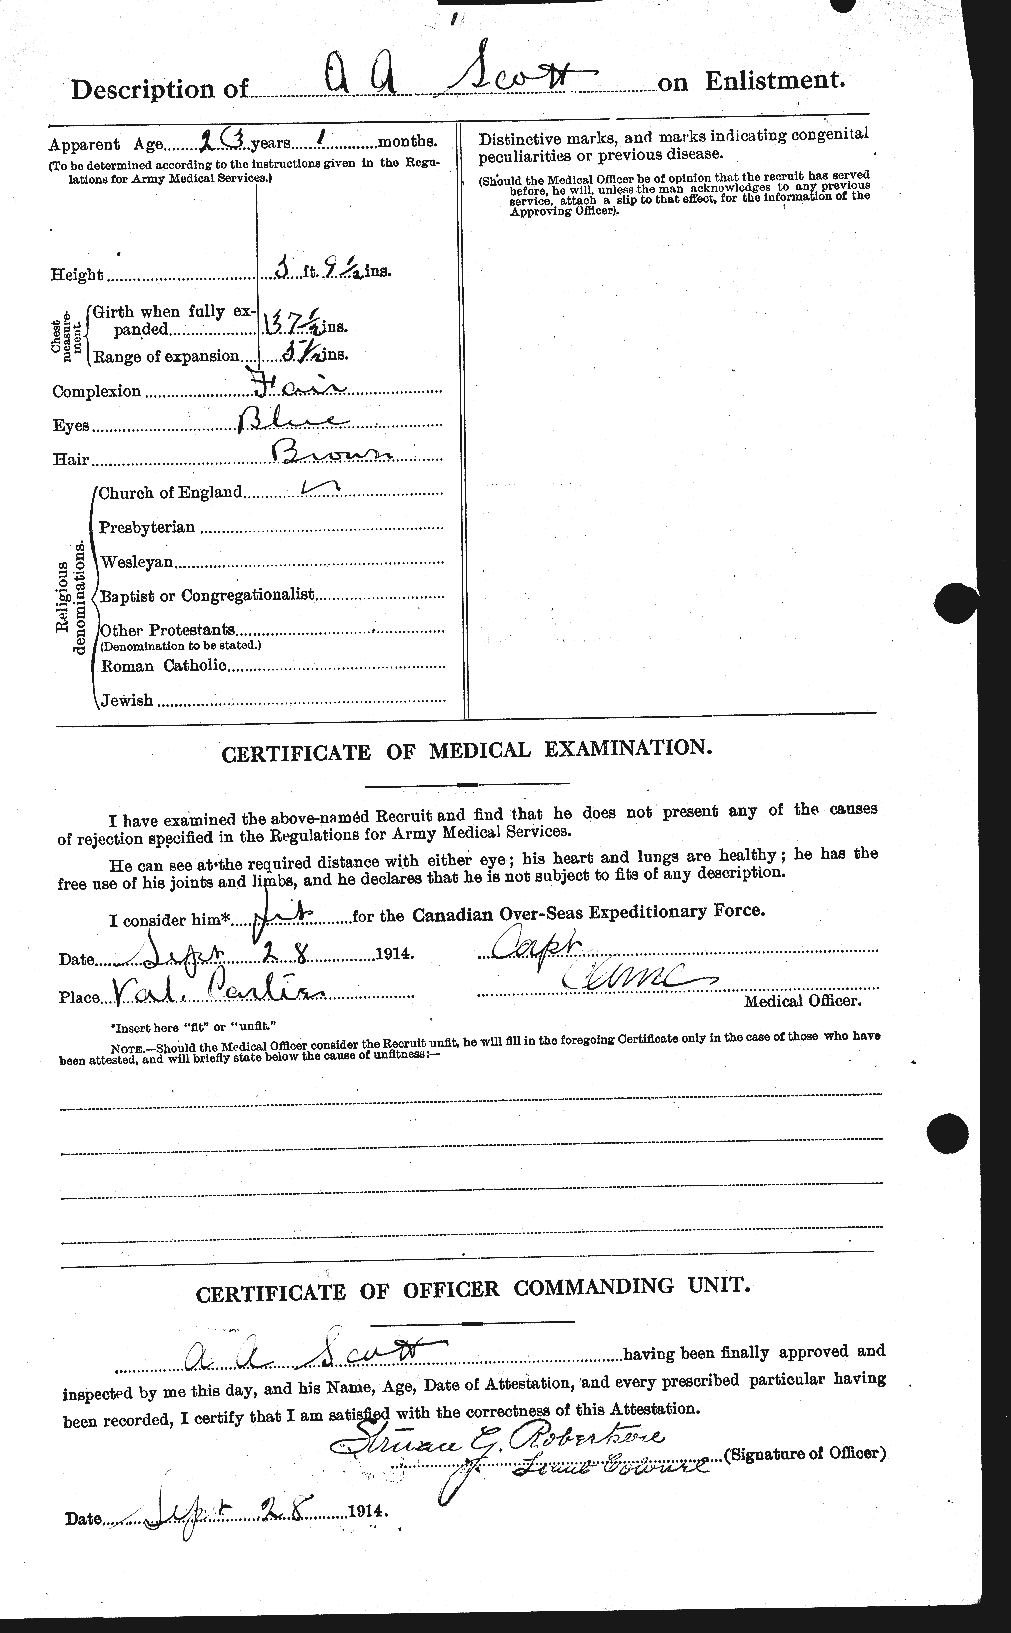 Personnel Records of the First World War - CEF 086407b